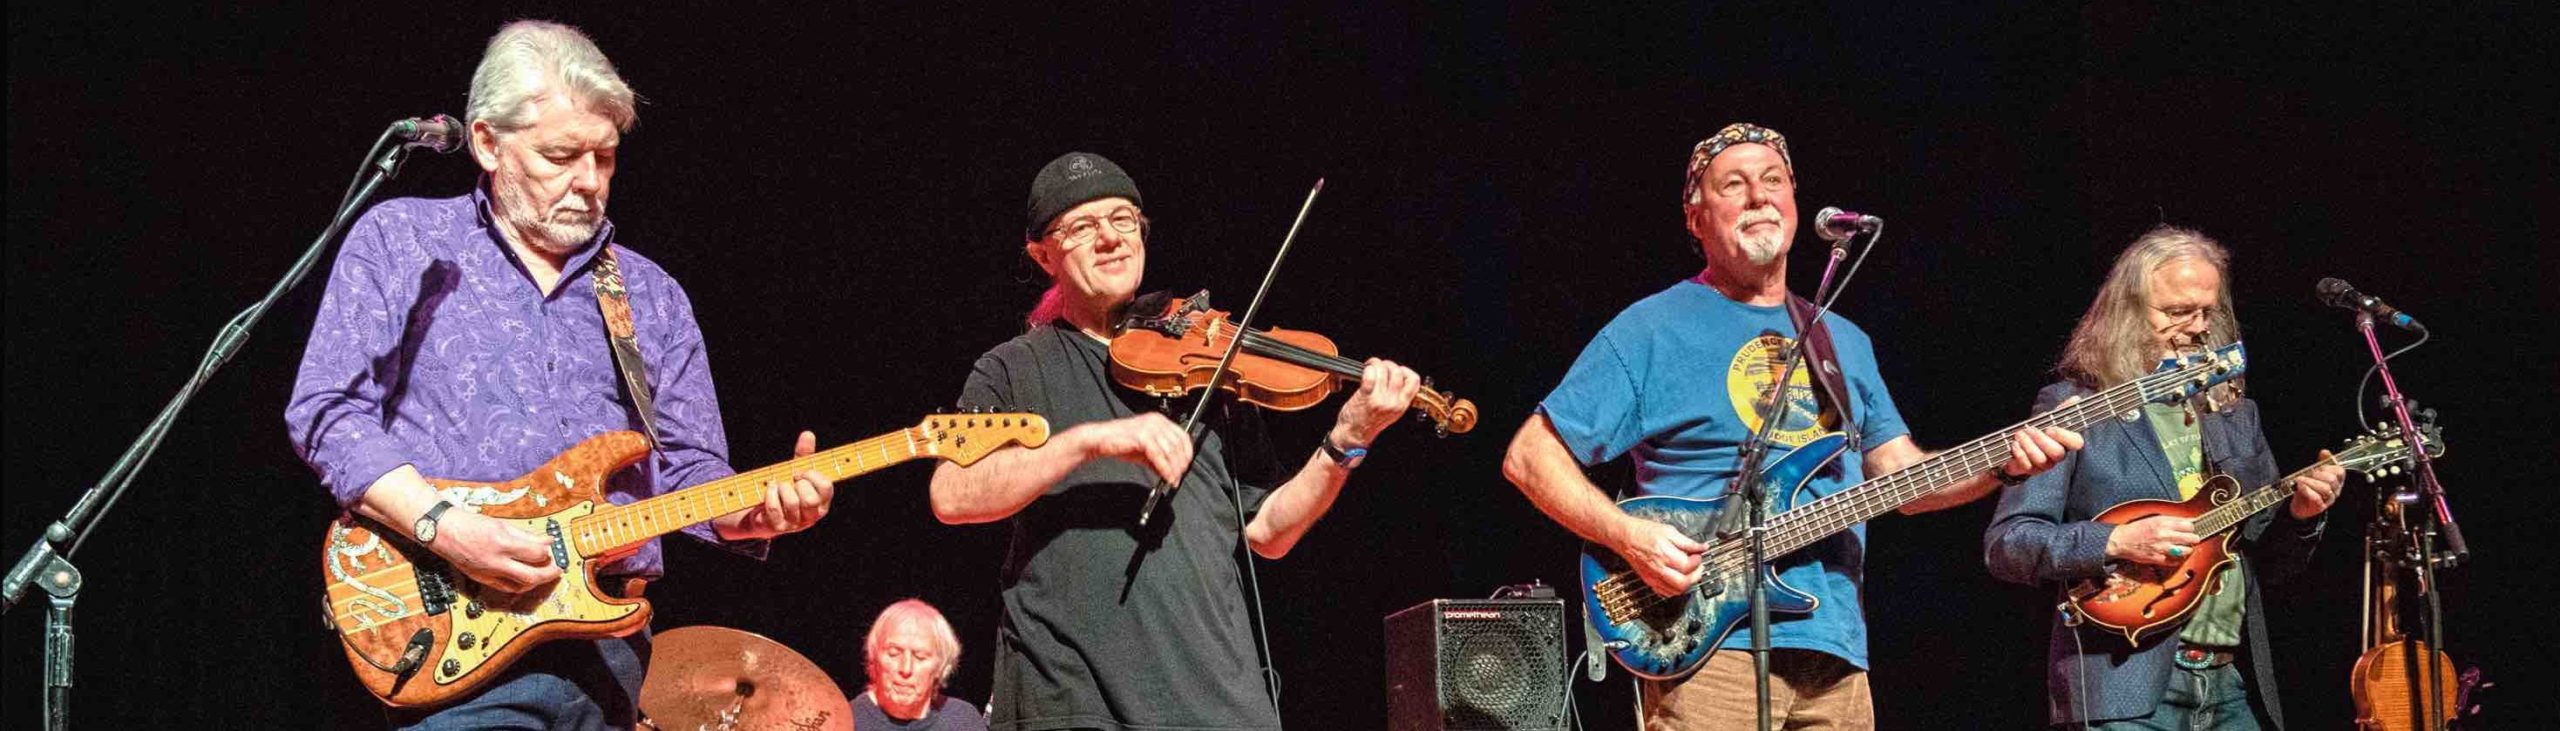 Fairport Convention on stage at The Stables, Milton Keynes, UK on 13 February 2019. Photo by David Jackson.